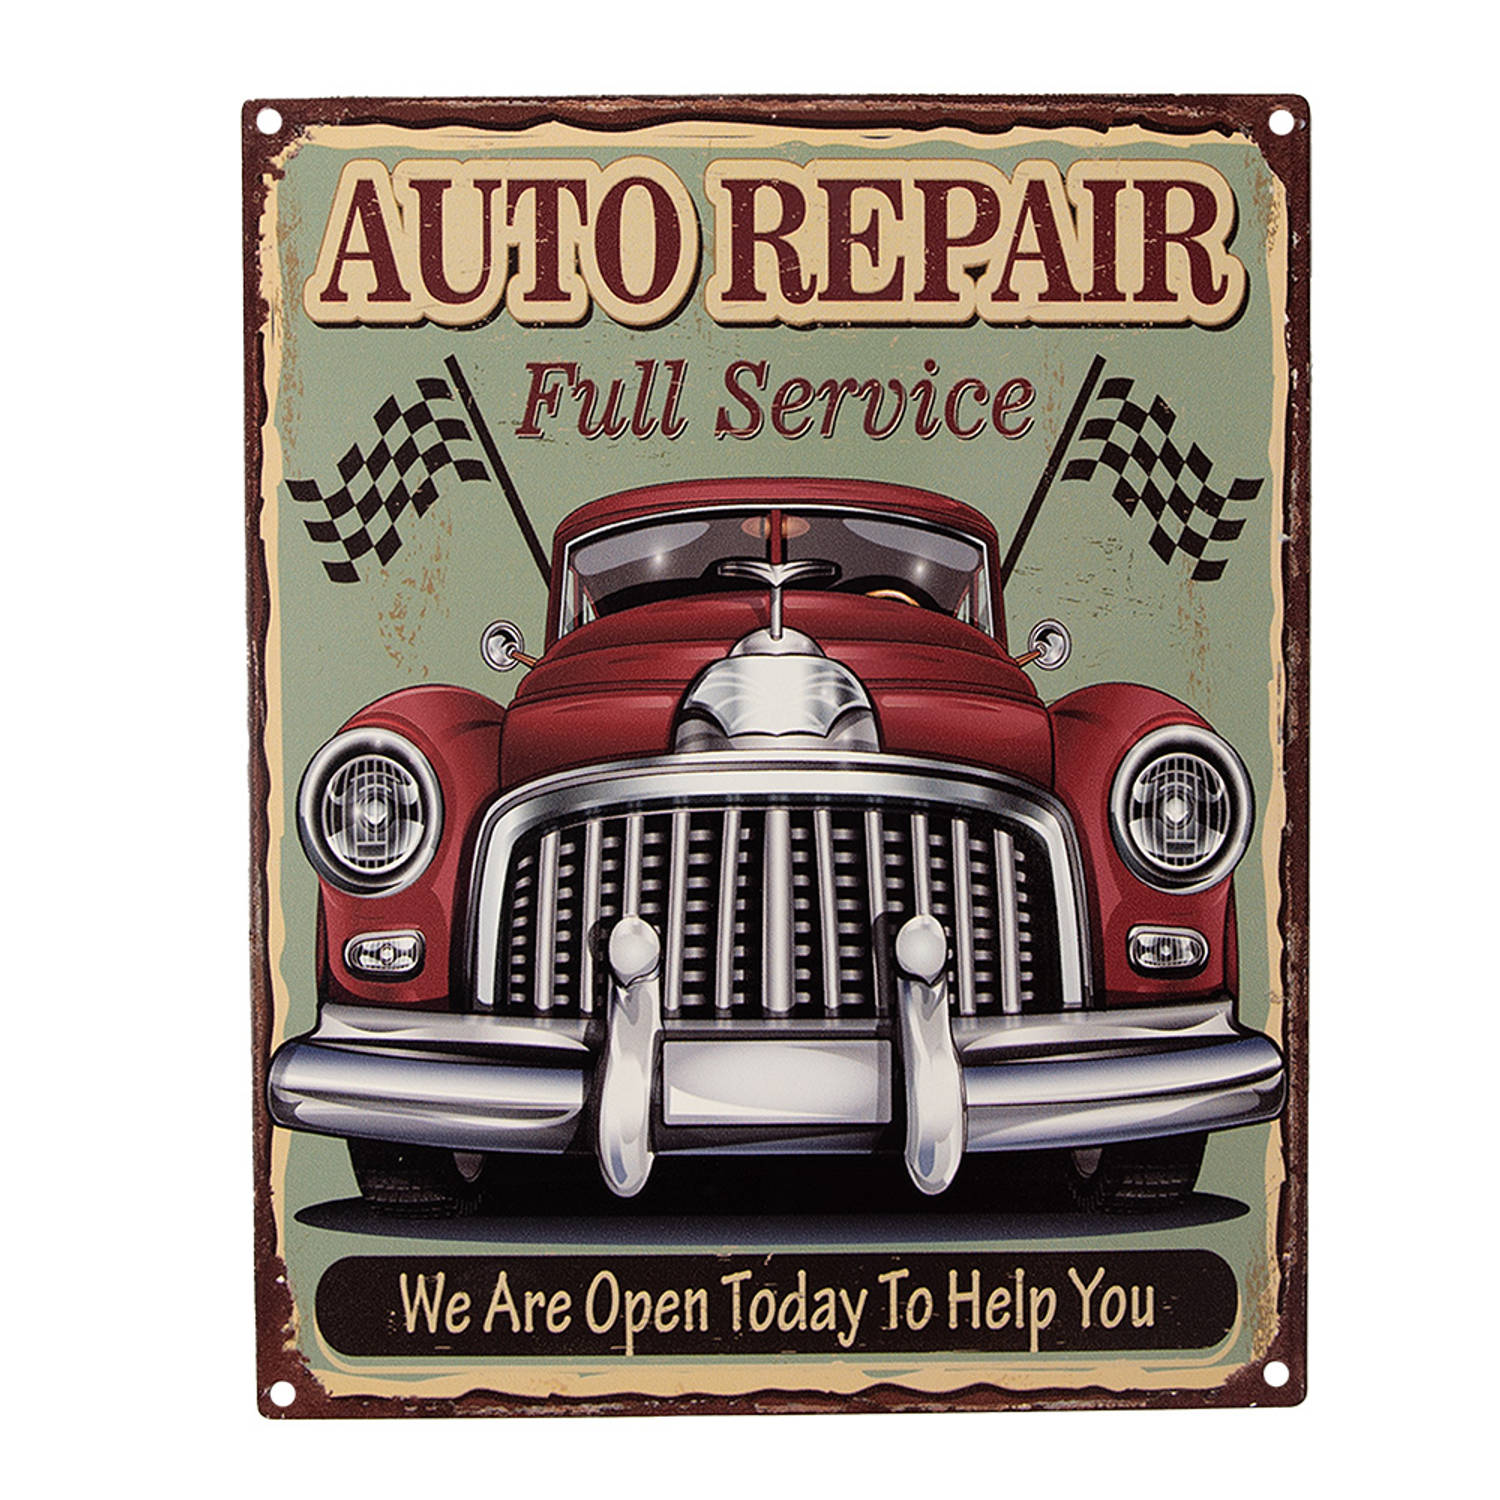 Clayre & Eef Tekstbord 20x25 Cm Groen Rood Ijzer Auto Auto Repair We Are Open Today To Help You Wand